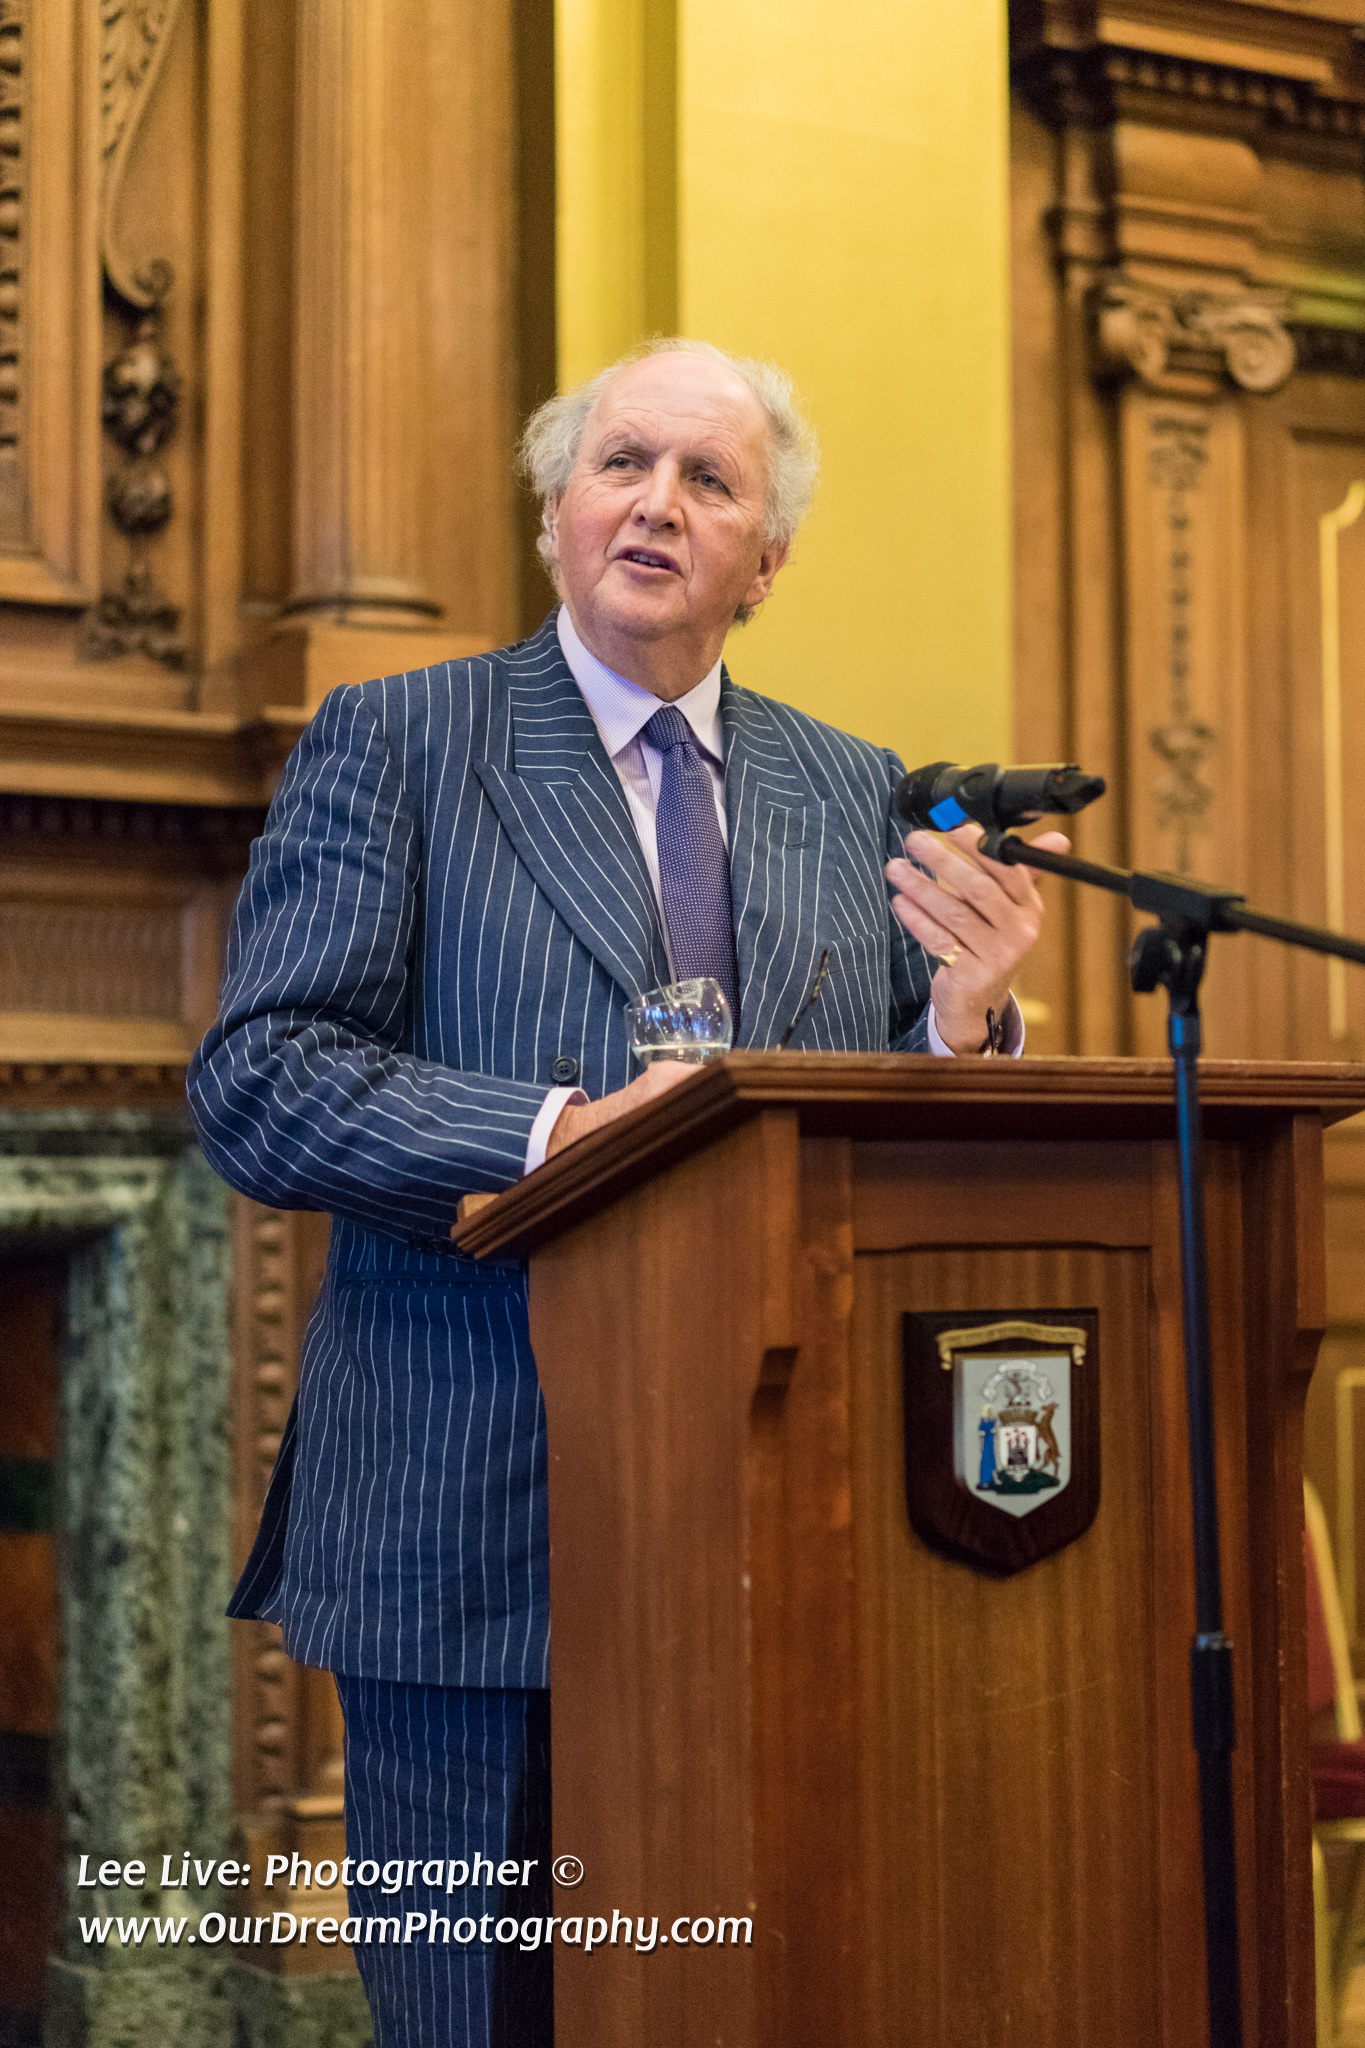 Event Photography at the City Chambers